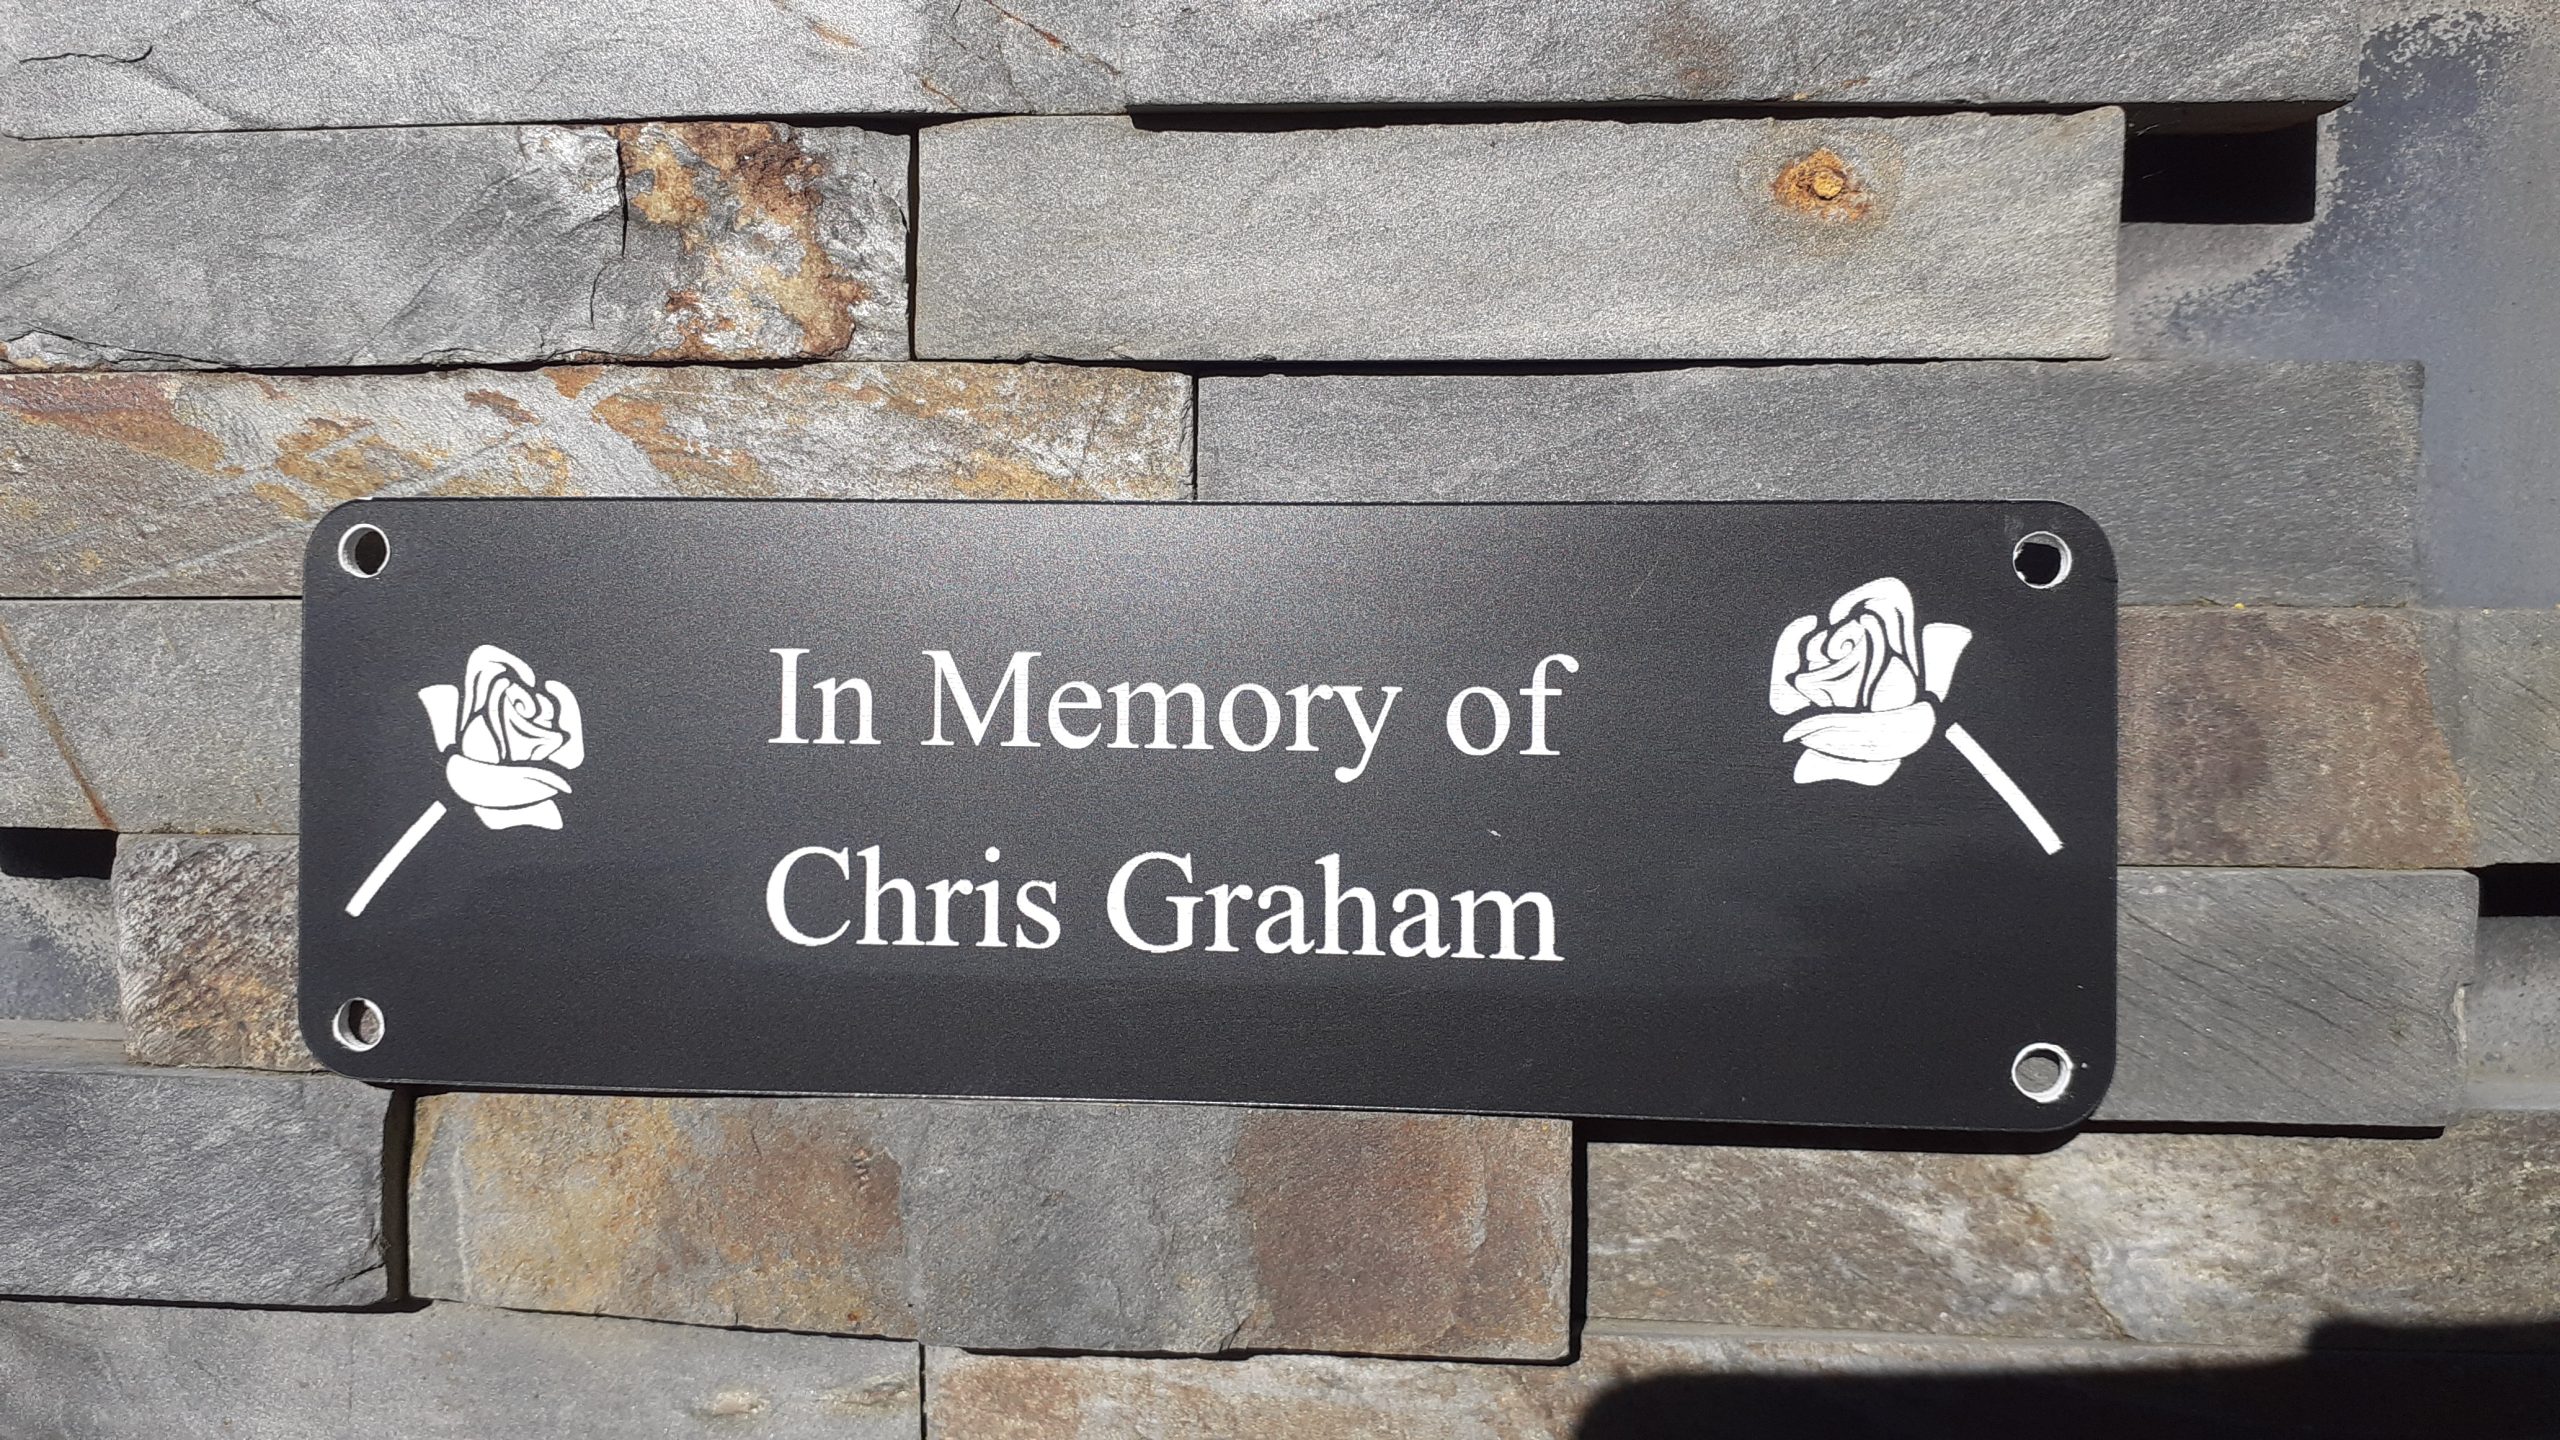 Personalised bench Plaques - 6" x 2" with decorative roses either side of the white engraved text, 4 screw holes in each corner.